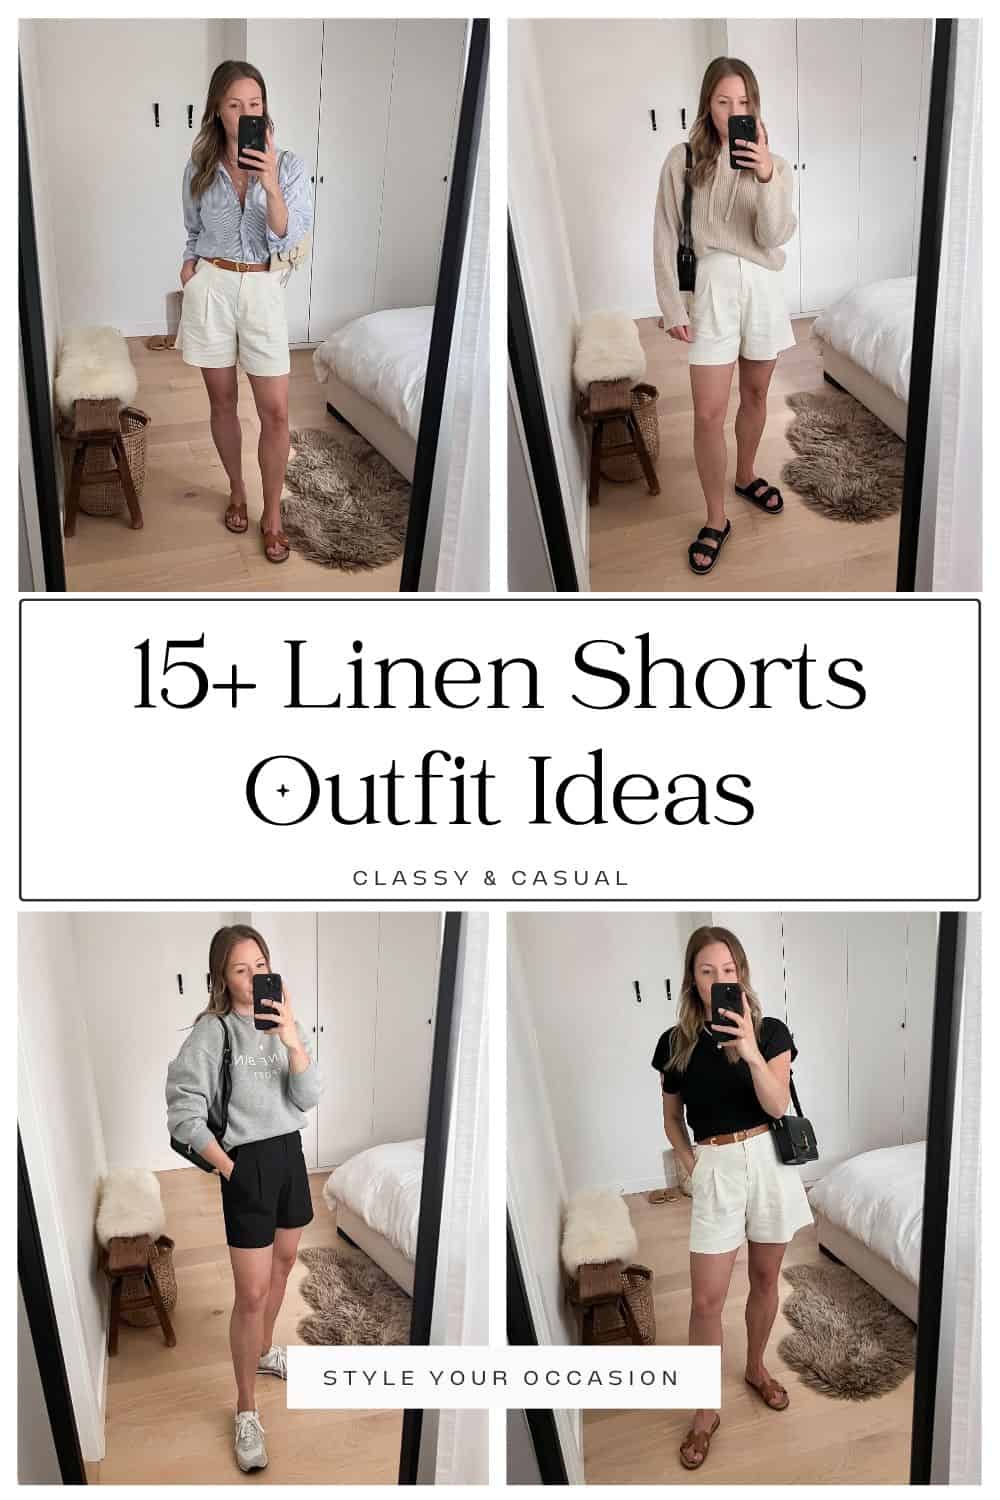 15+ Linen Shorts Outfit Ideas For Spring, Summer & Vacay Mode!